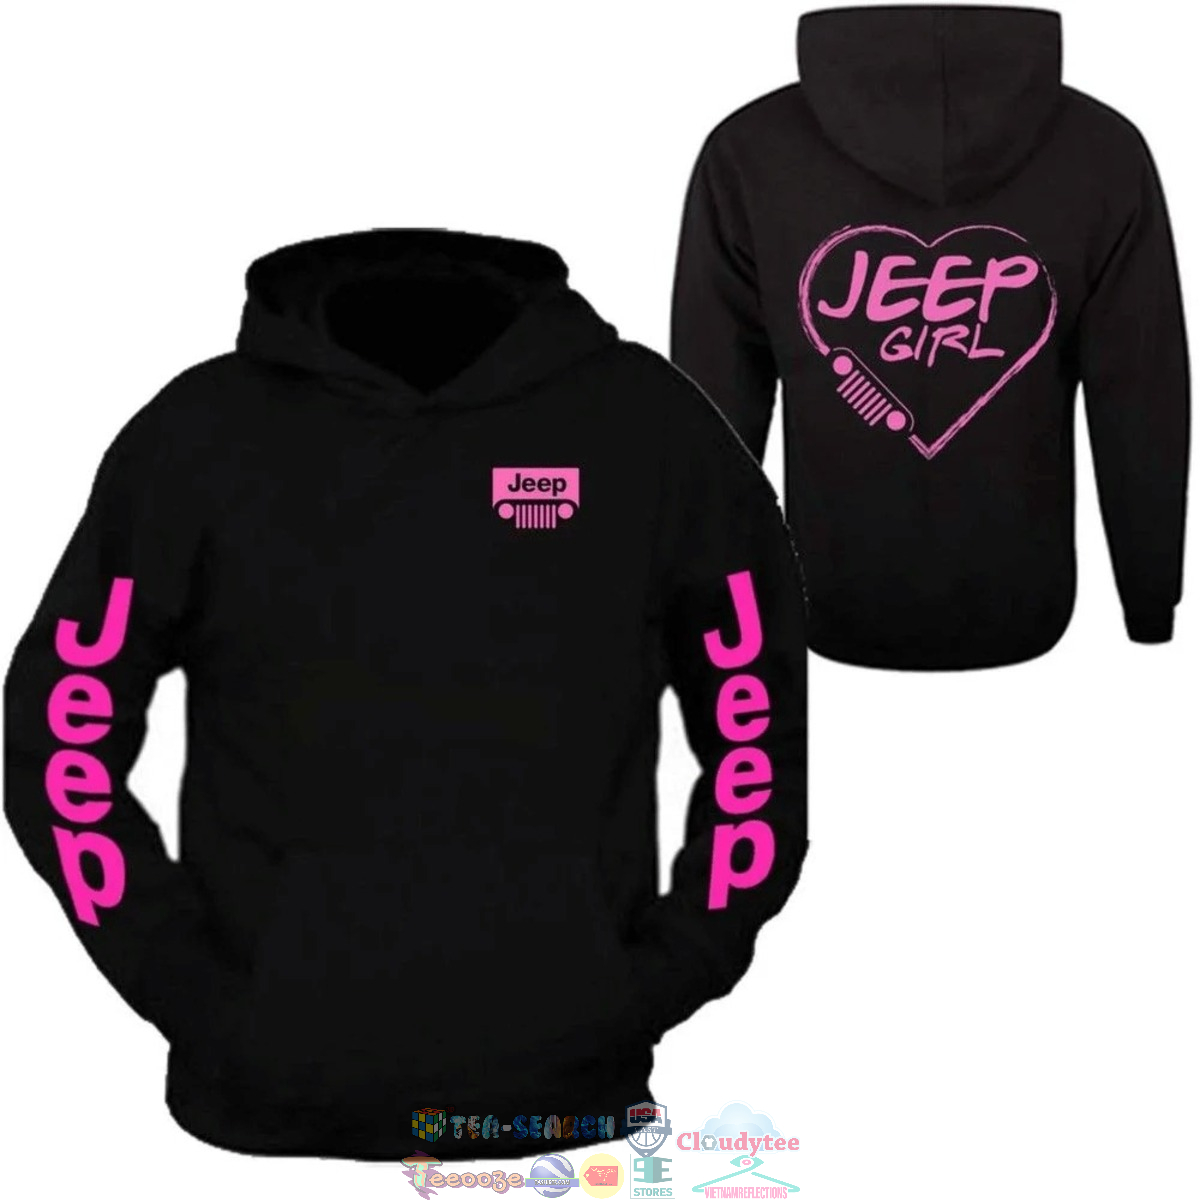 Jeep Girl 3D hoodie and t-shirt – Saleoff